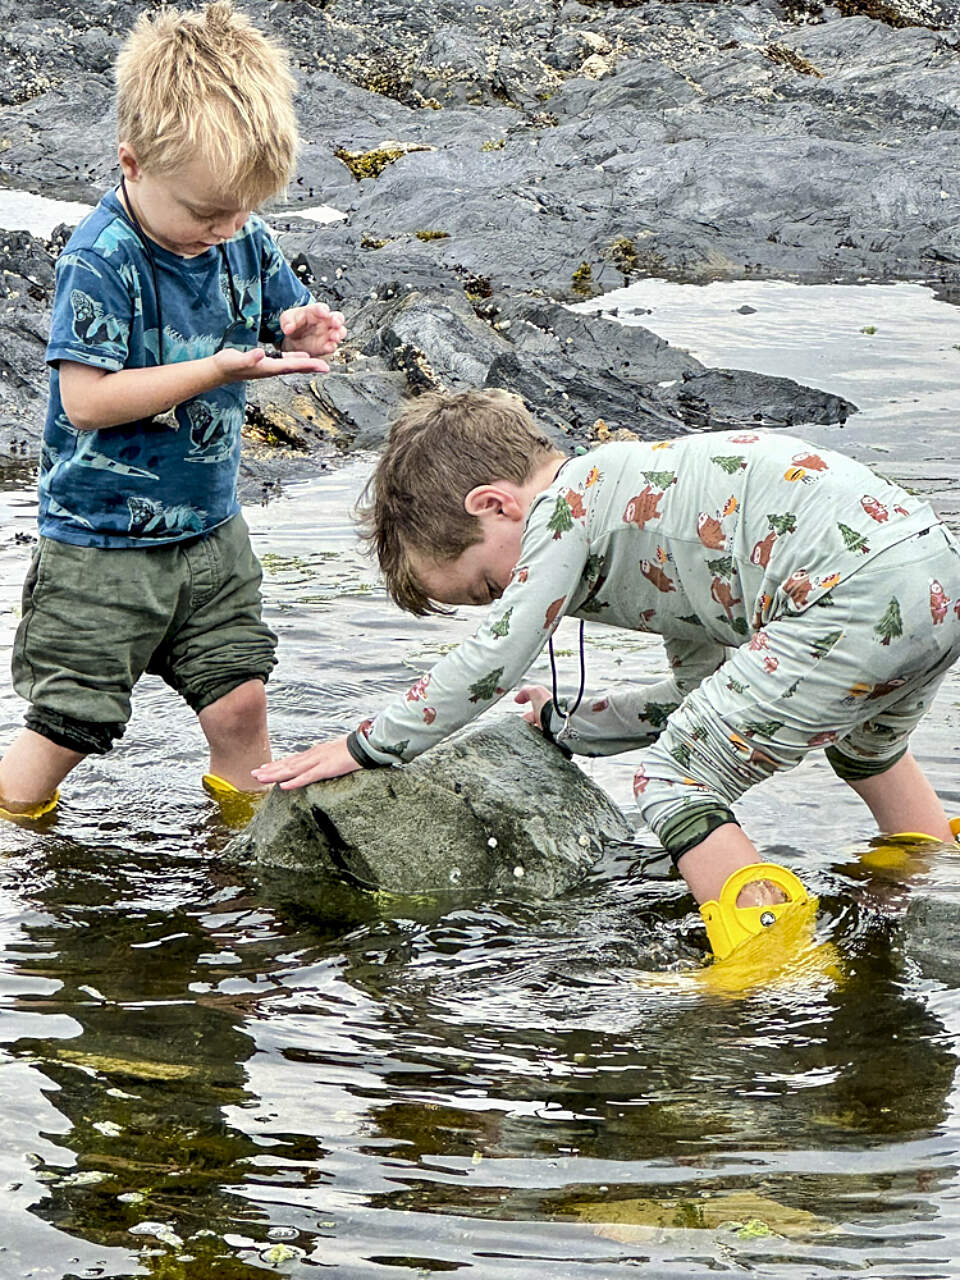 Two toddler boys play in the water at low tide in Ketchikan, Alaska